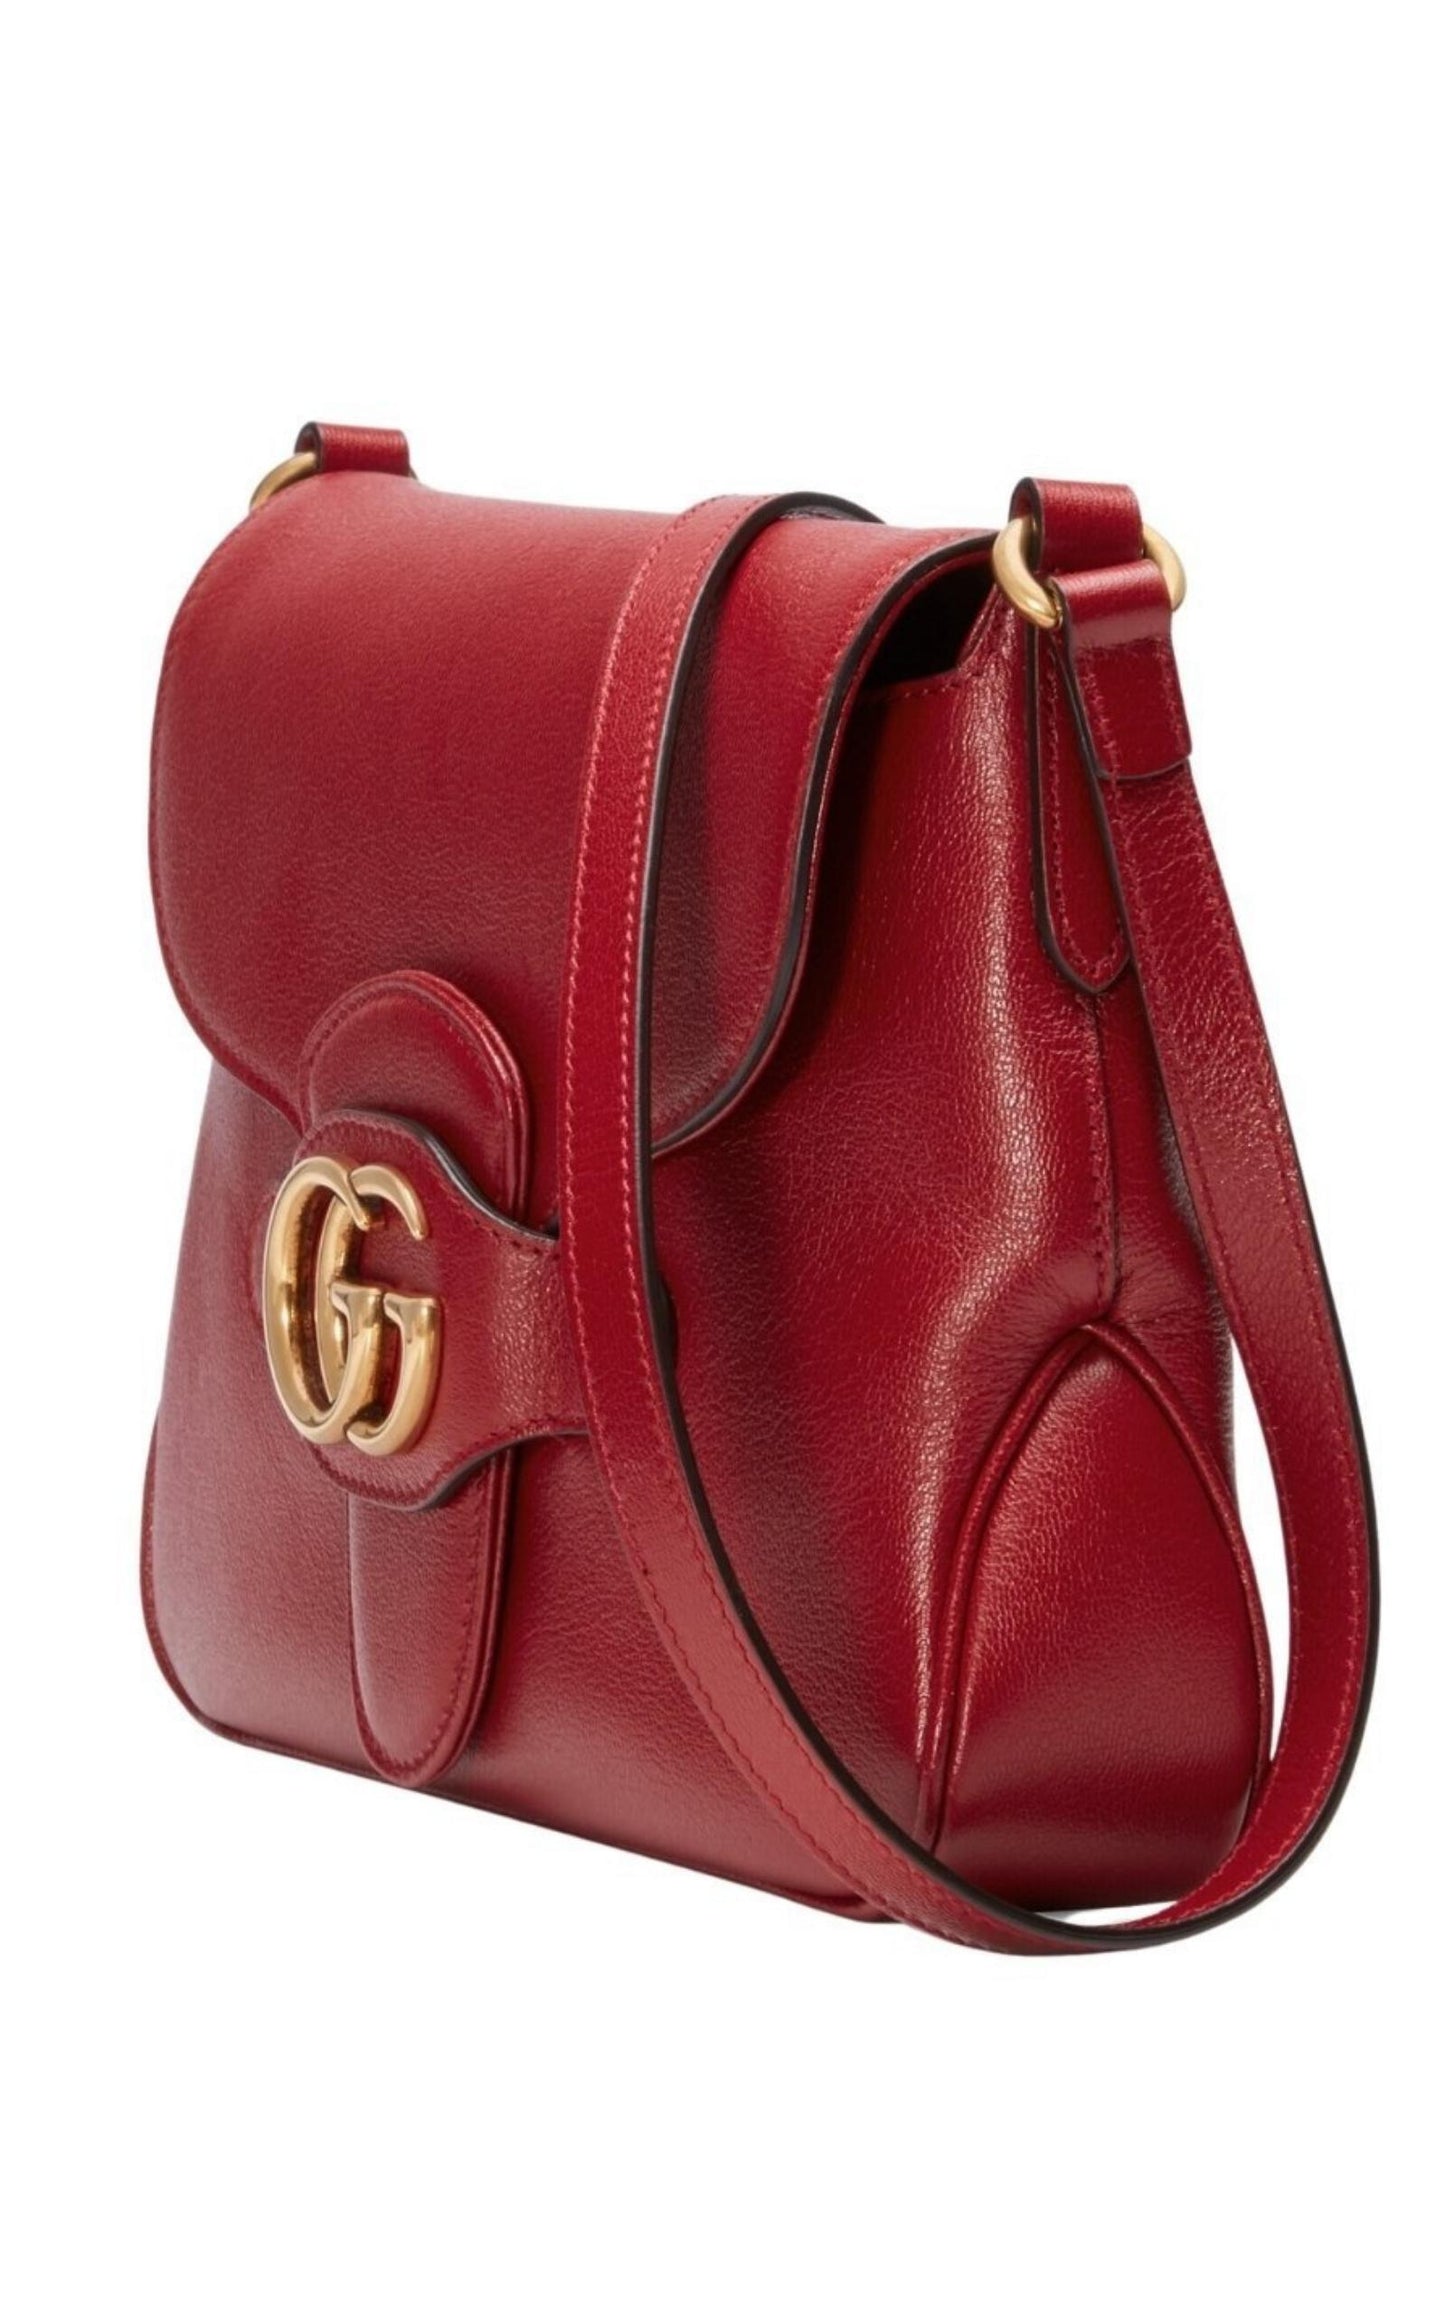  GucciSmall Messenger with Double GG Bag in Red - Runway Catalog